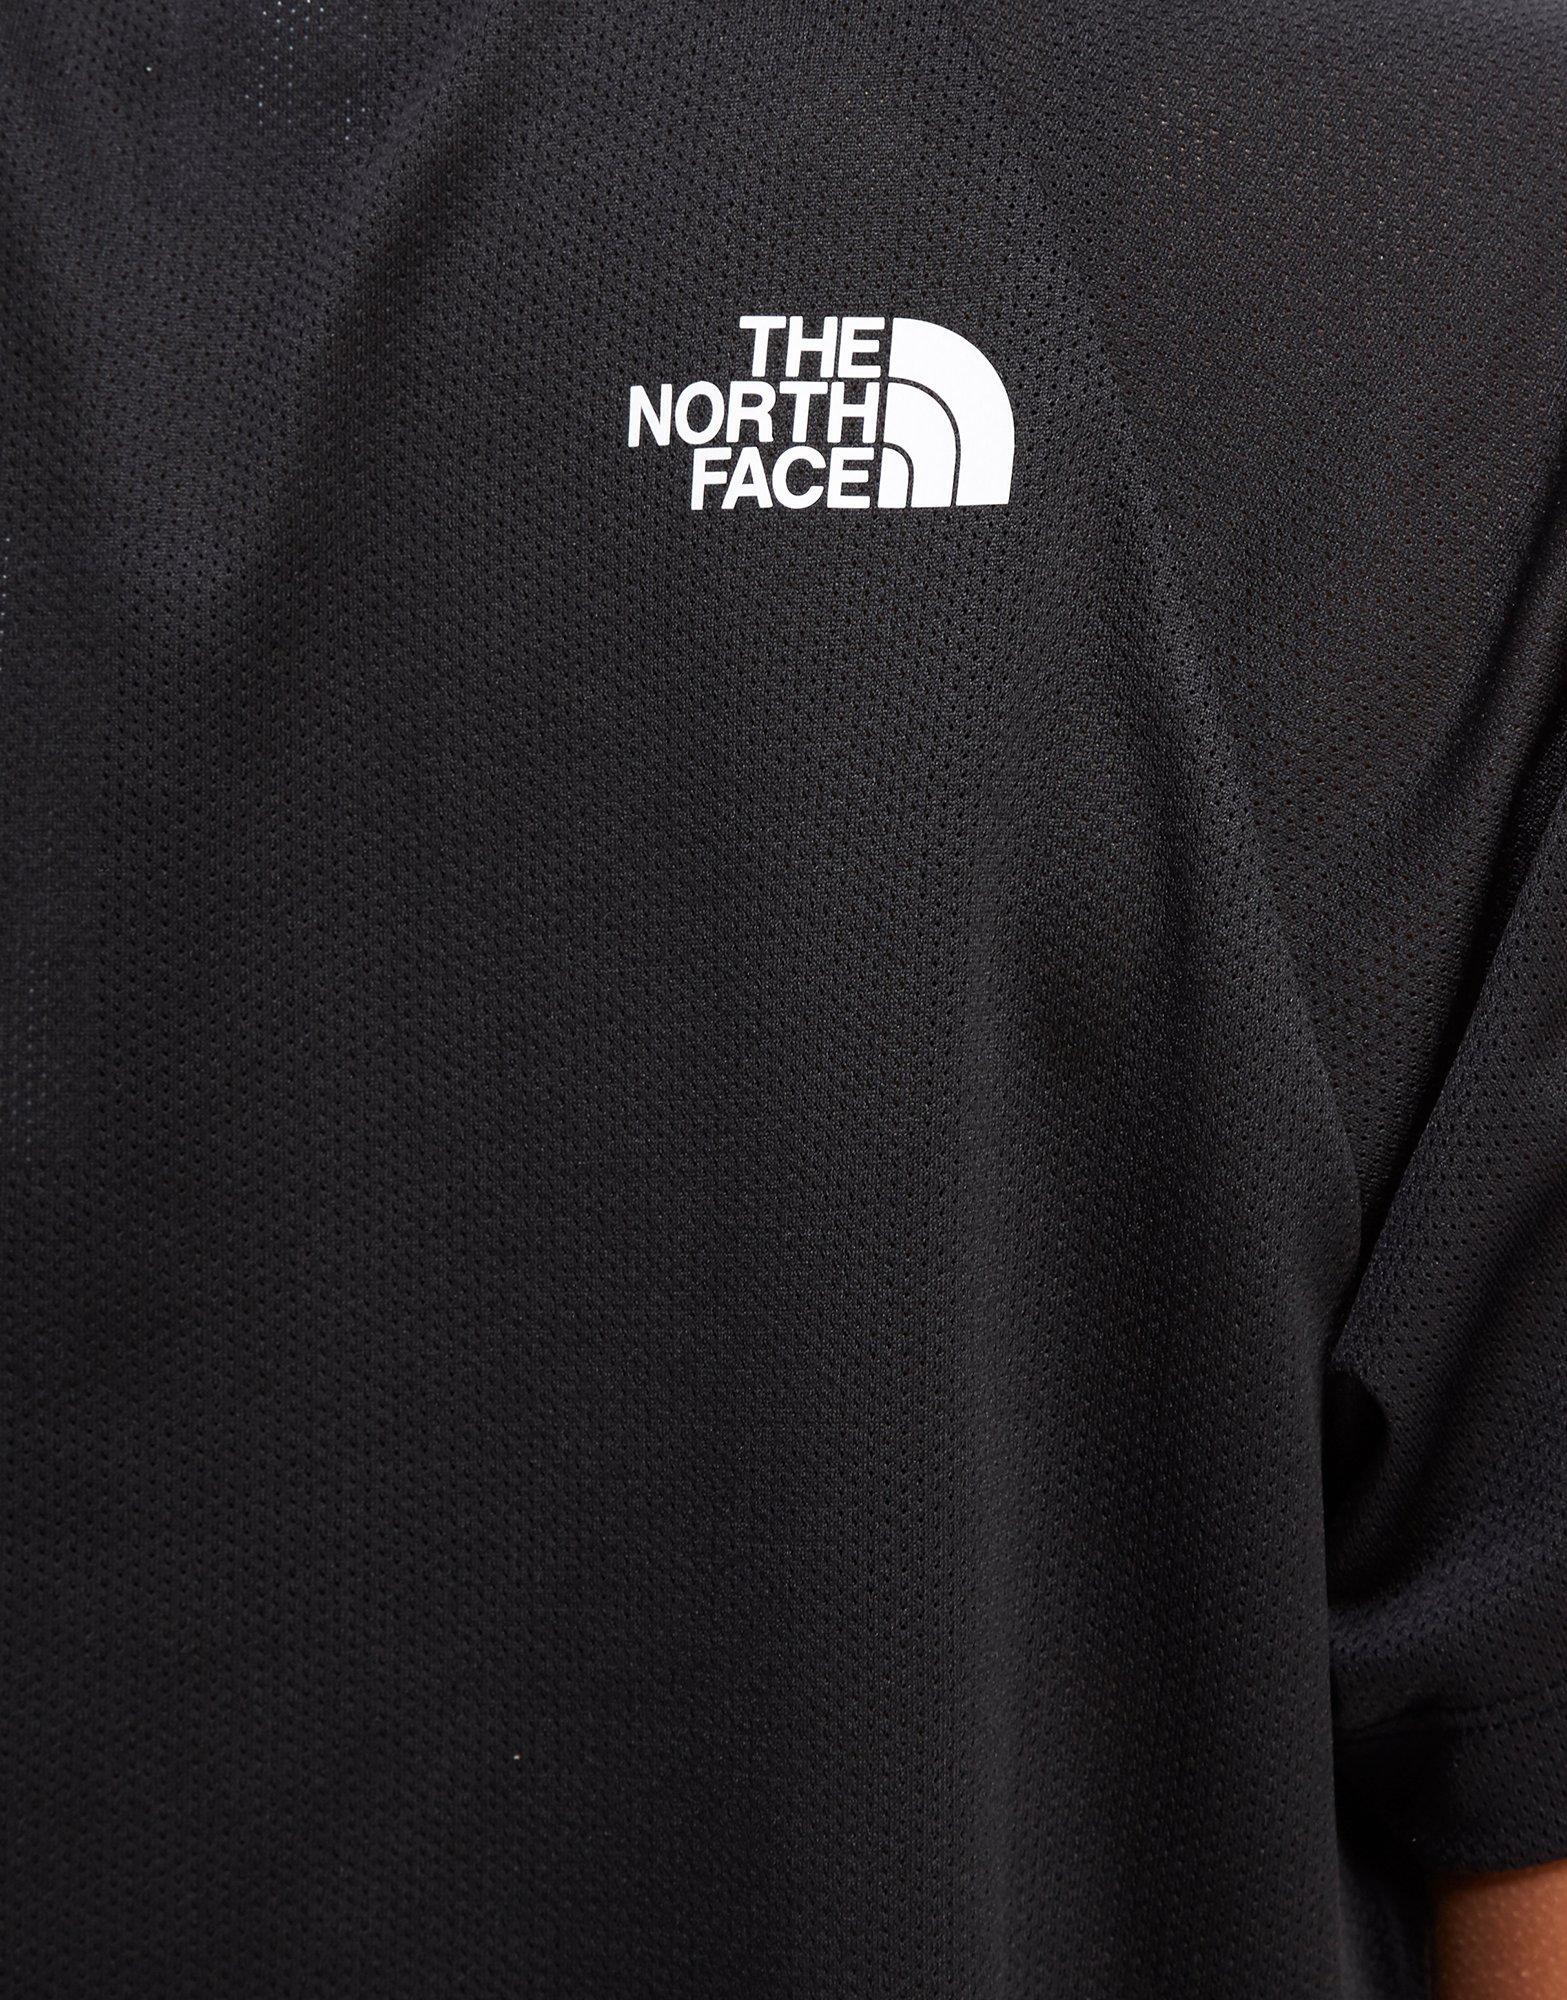 The North Face Cotton Mesh Crop T-shirt in Black/White (Black) - Lyst